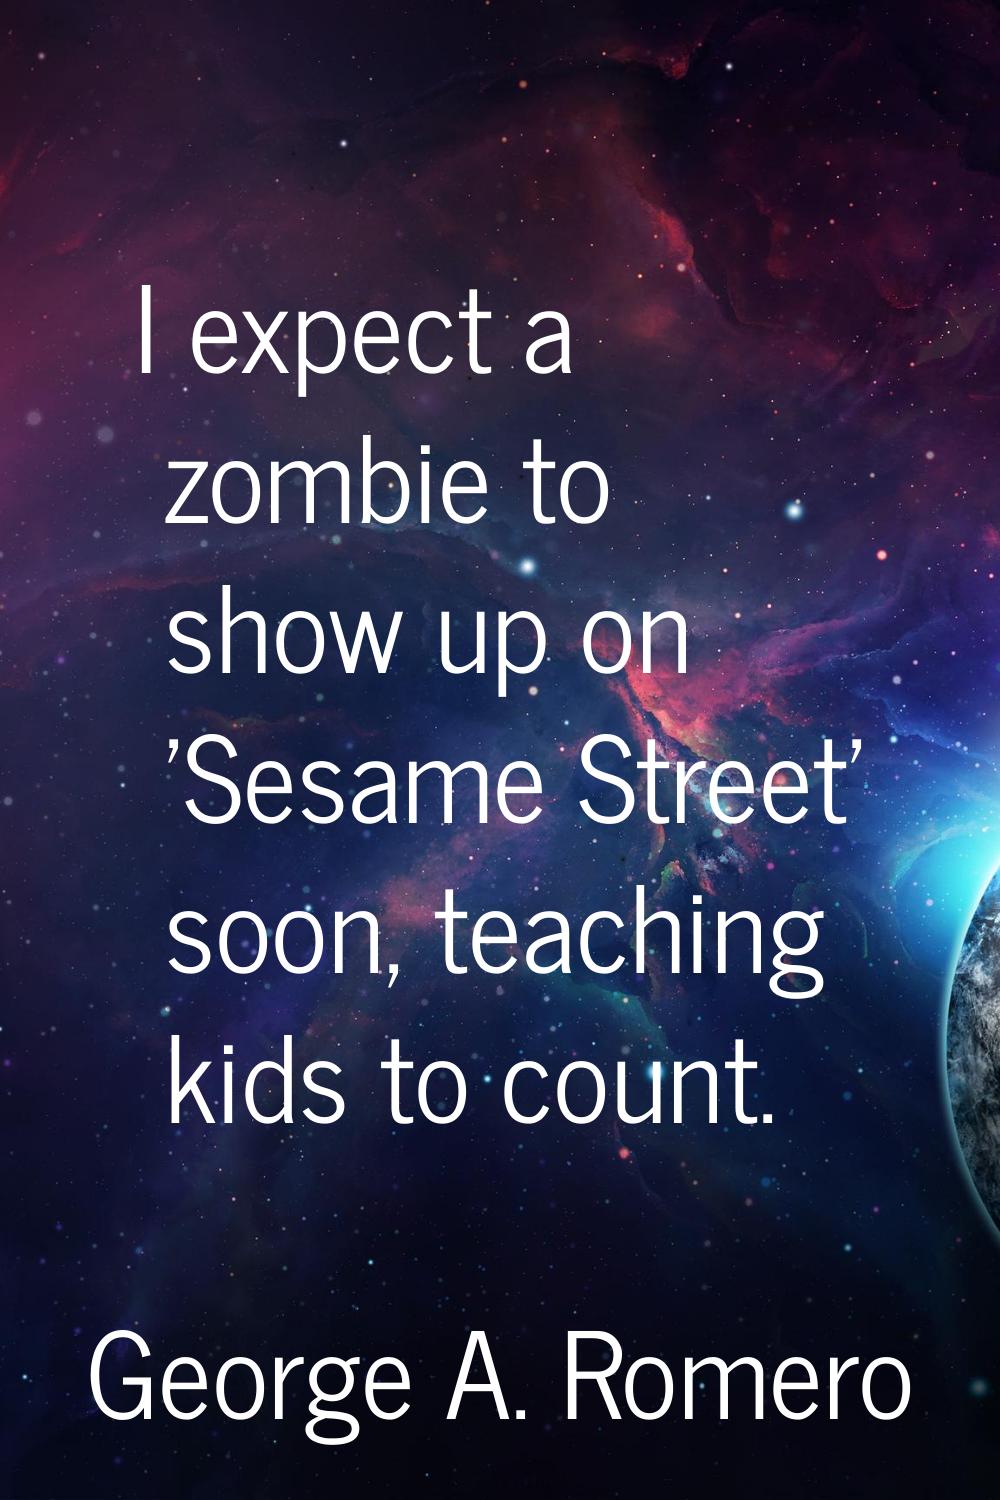 I expect a zombie to show up on 'Sesame Street' soon, teaching kids to count.